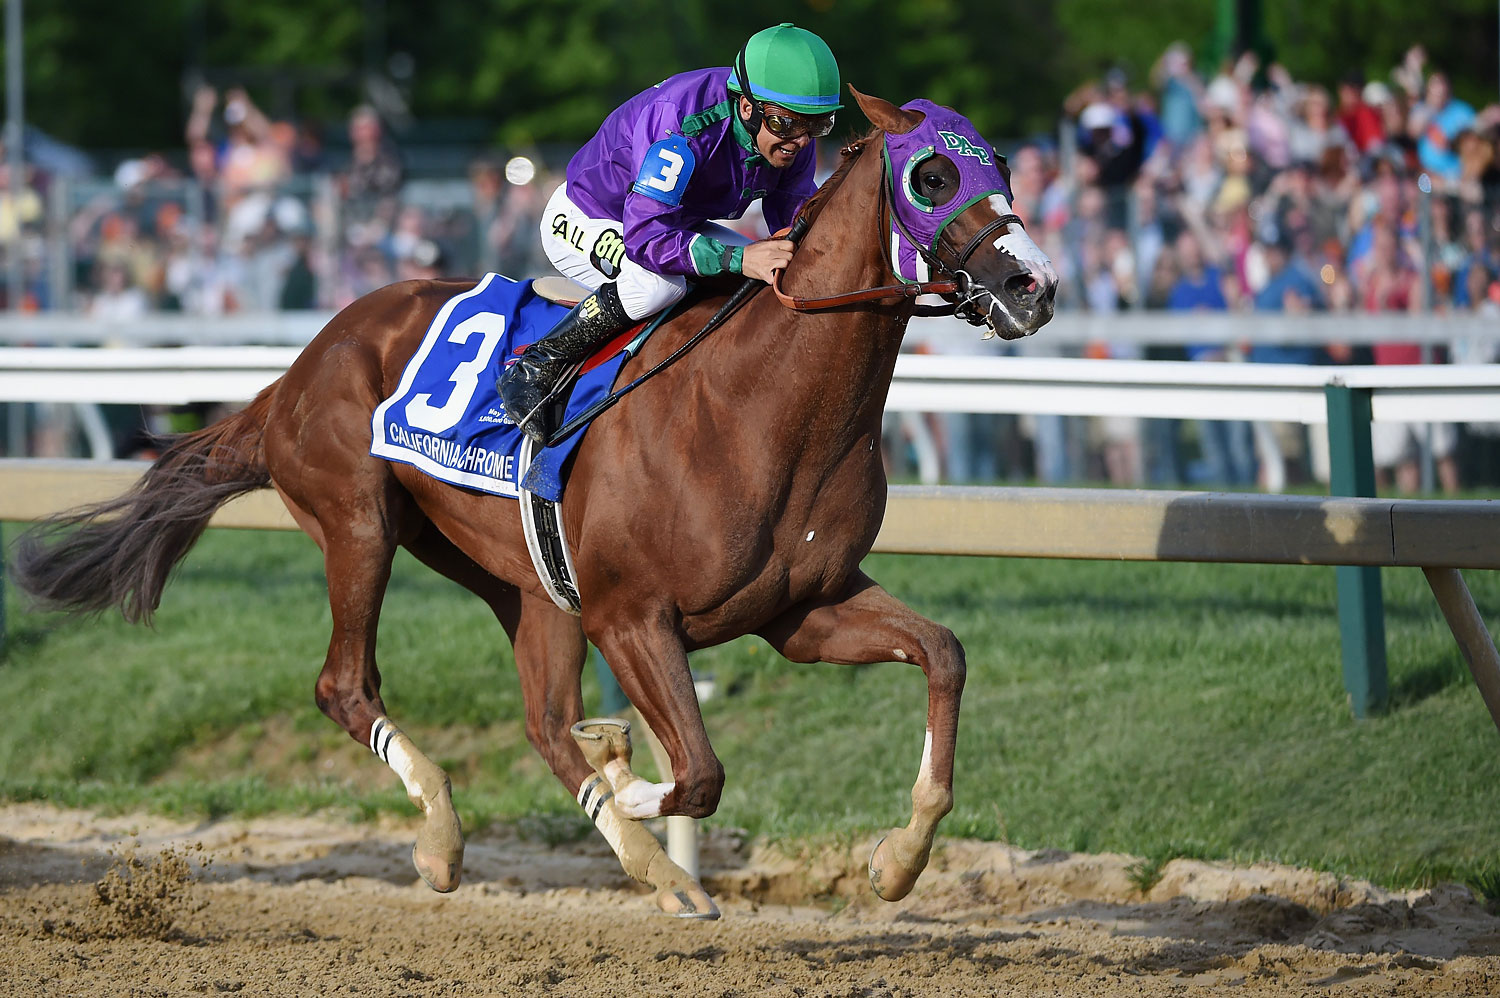 California Chrome #3, ridden by Victor Espinoza, head to the finish line enroute to winning the 139th running of the Preakness Stakes at Pimlico Race Course on May 17, 2014 in Baltimore. (Molly Riley—Getty Images)